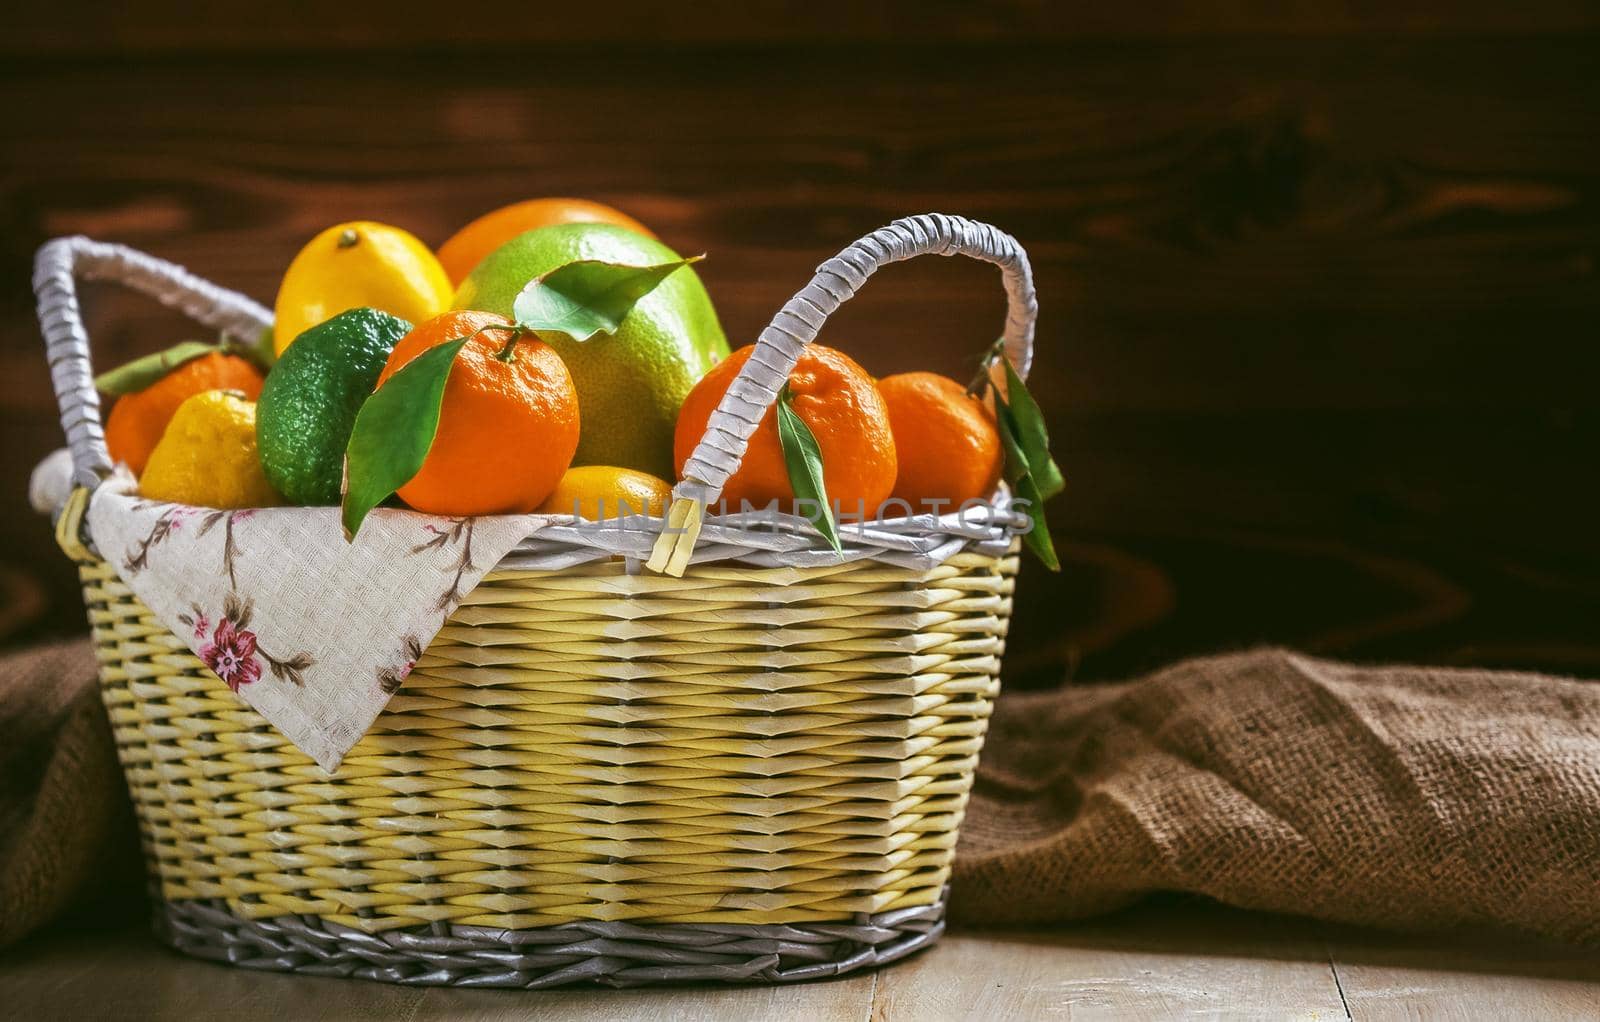 citrus fruits in a wicker basket on a wooden background